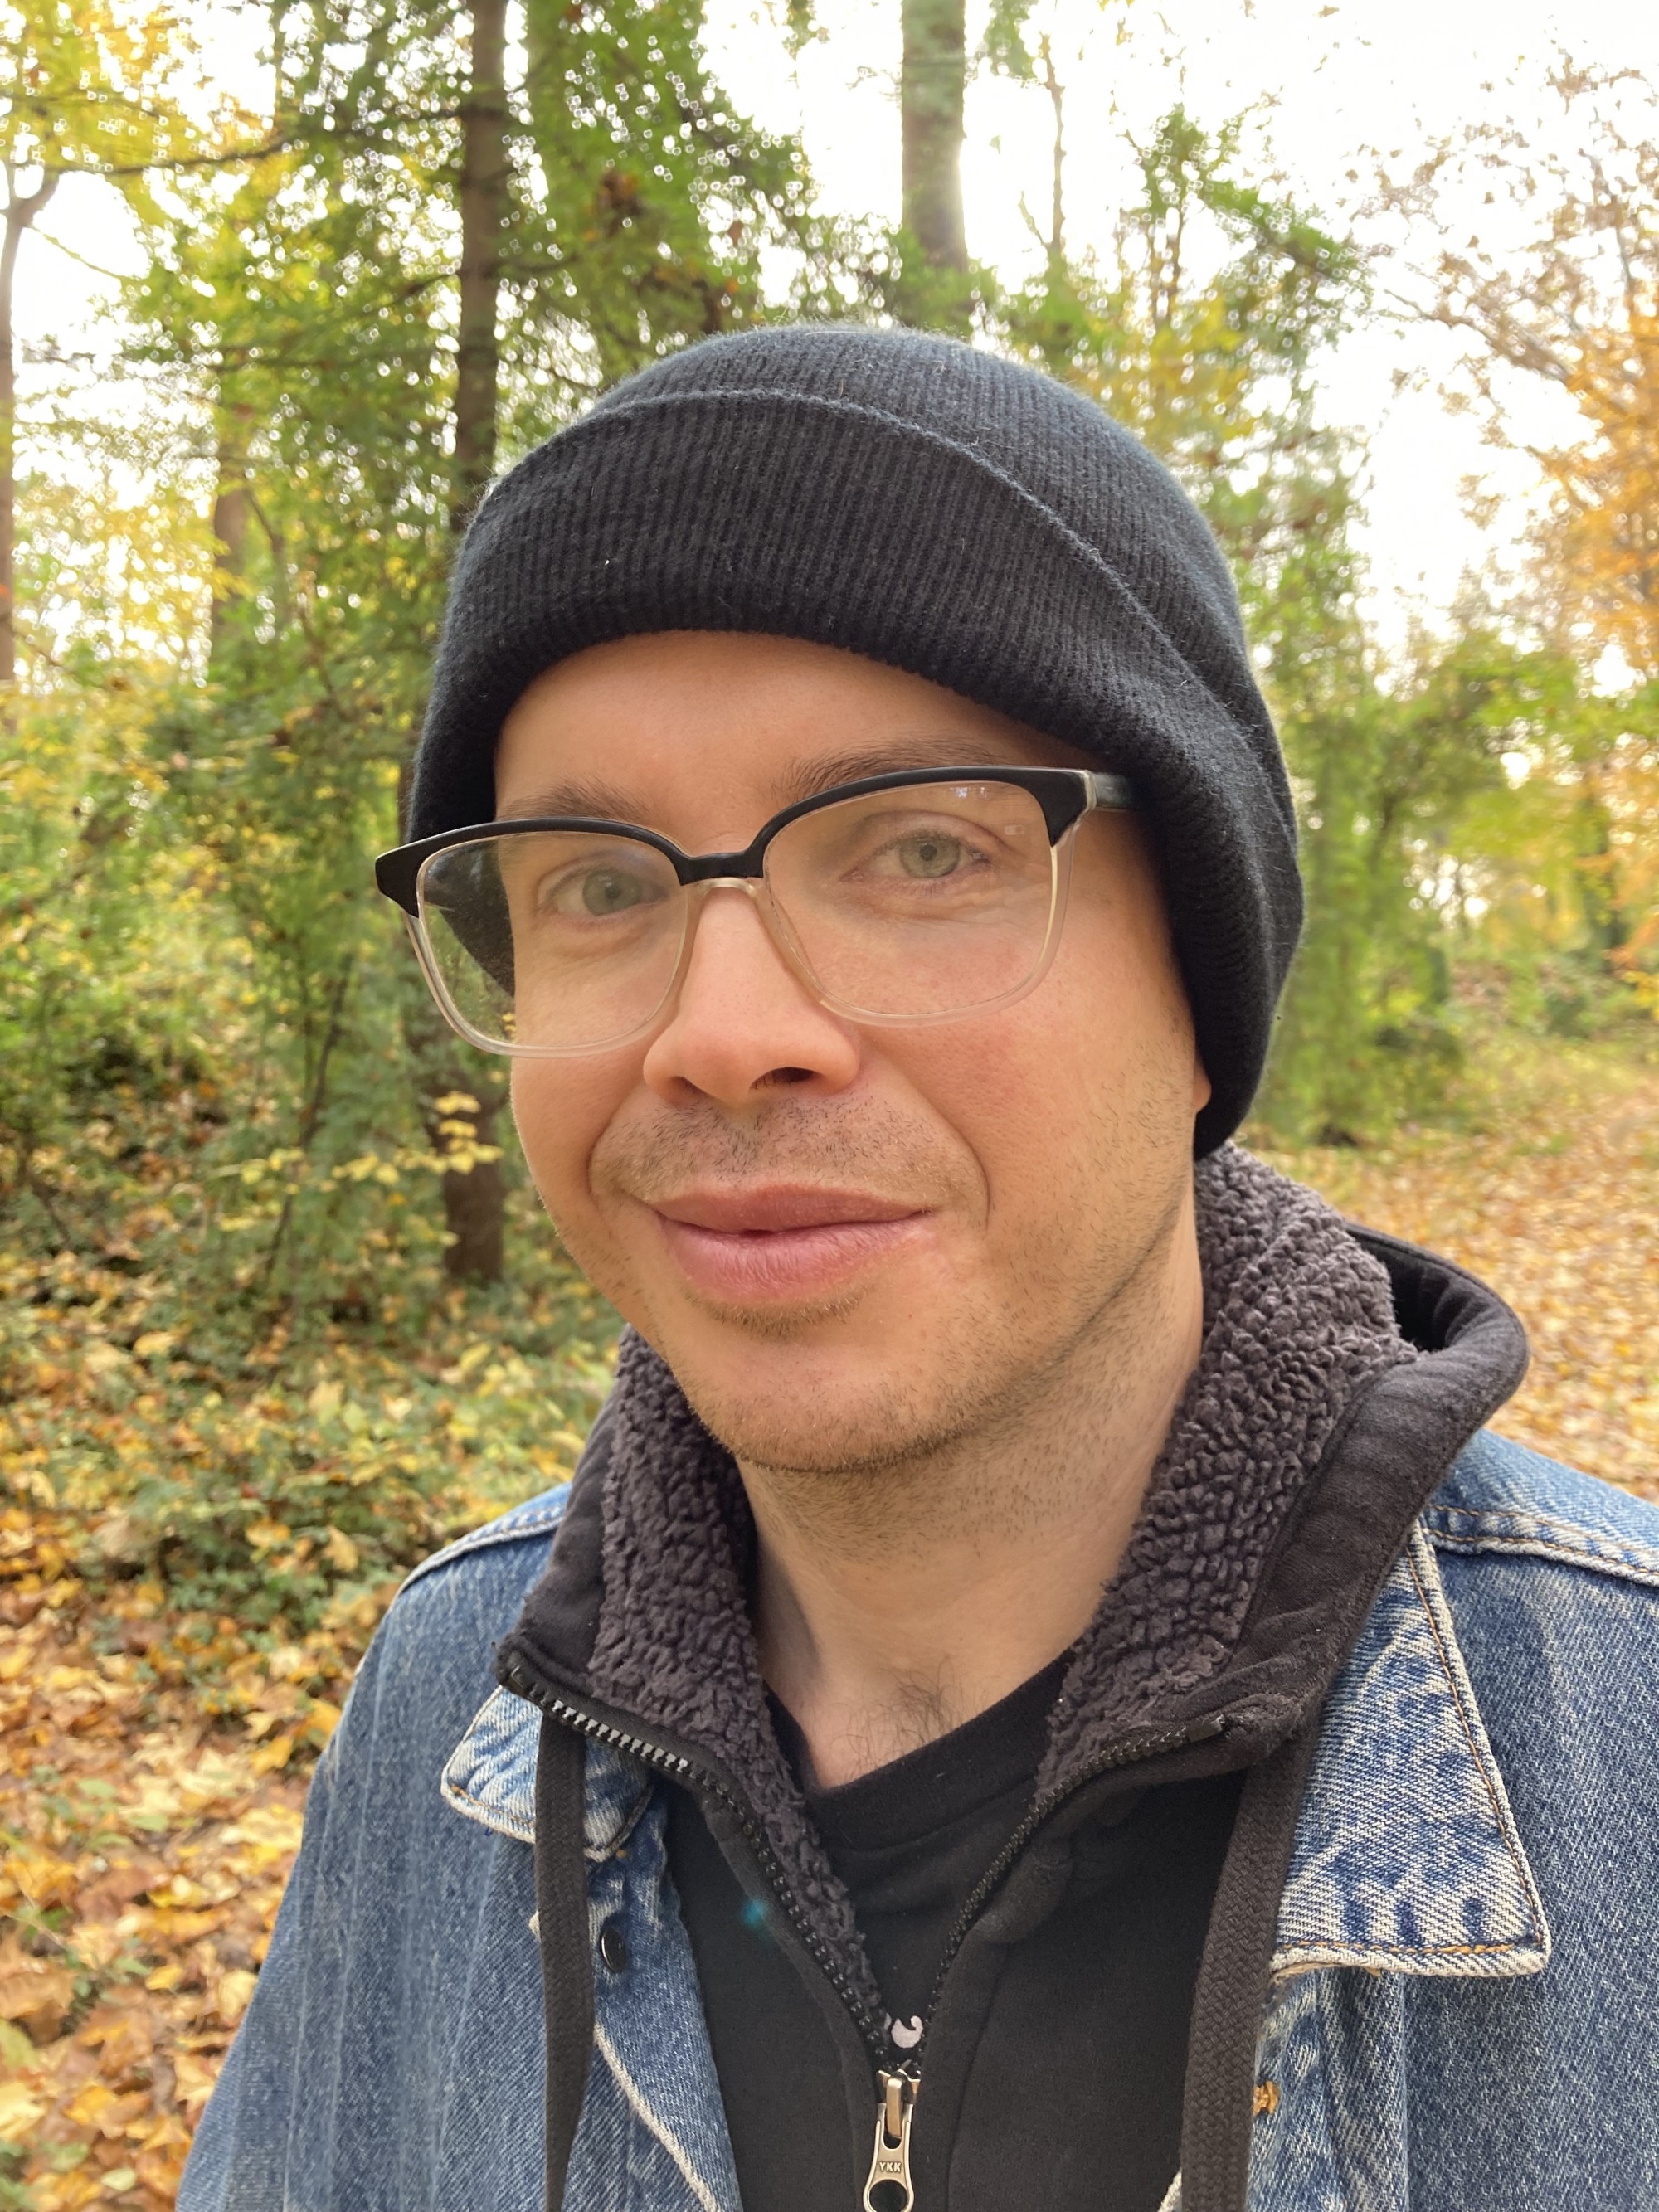 Ted Rees wears glasses and a beanie, standing in the woods. Leaves are on the ground and he's smiling.